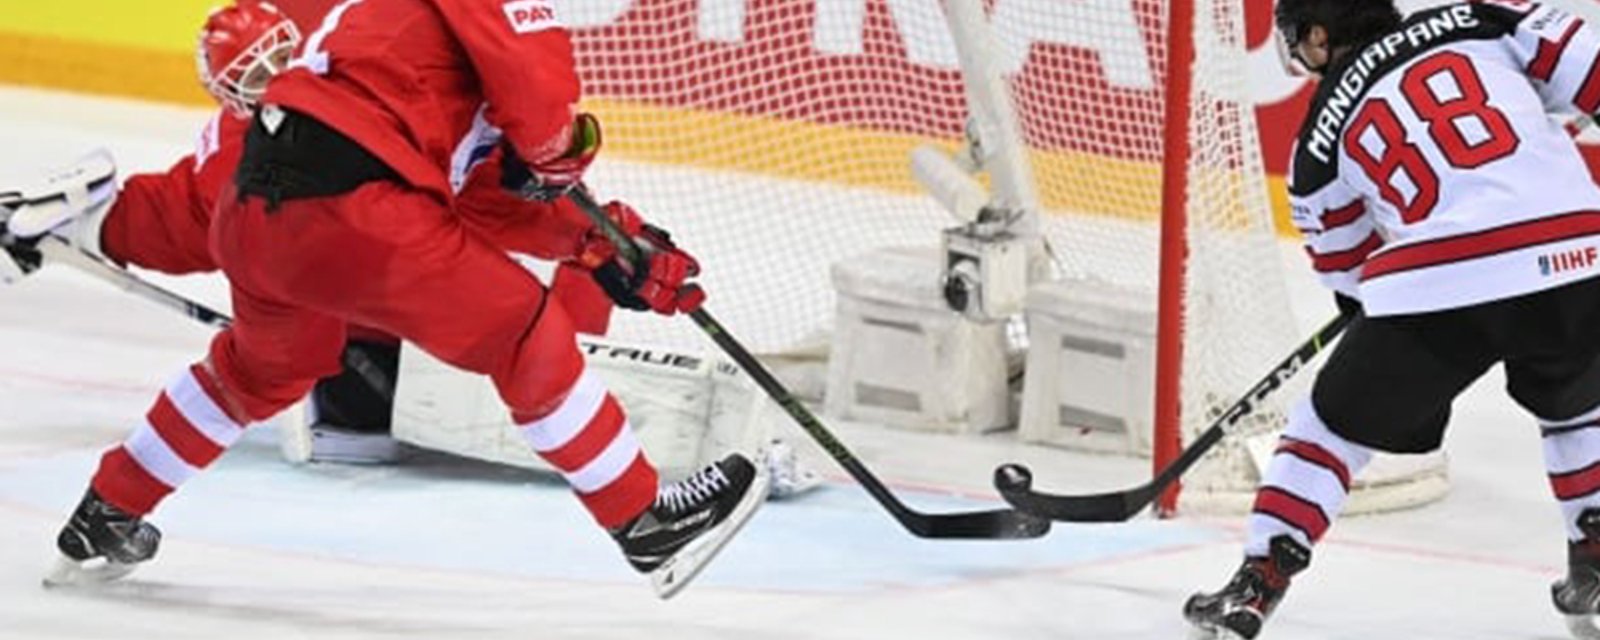 Team Canada wins an OT thriller over Russia to advance in the IIHF World Championship